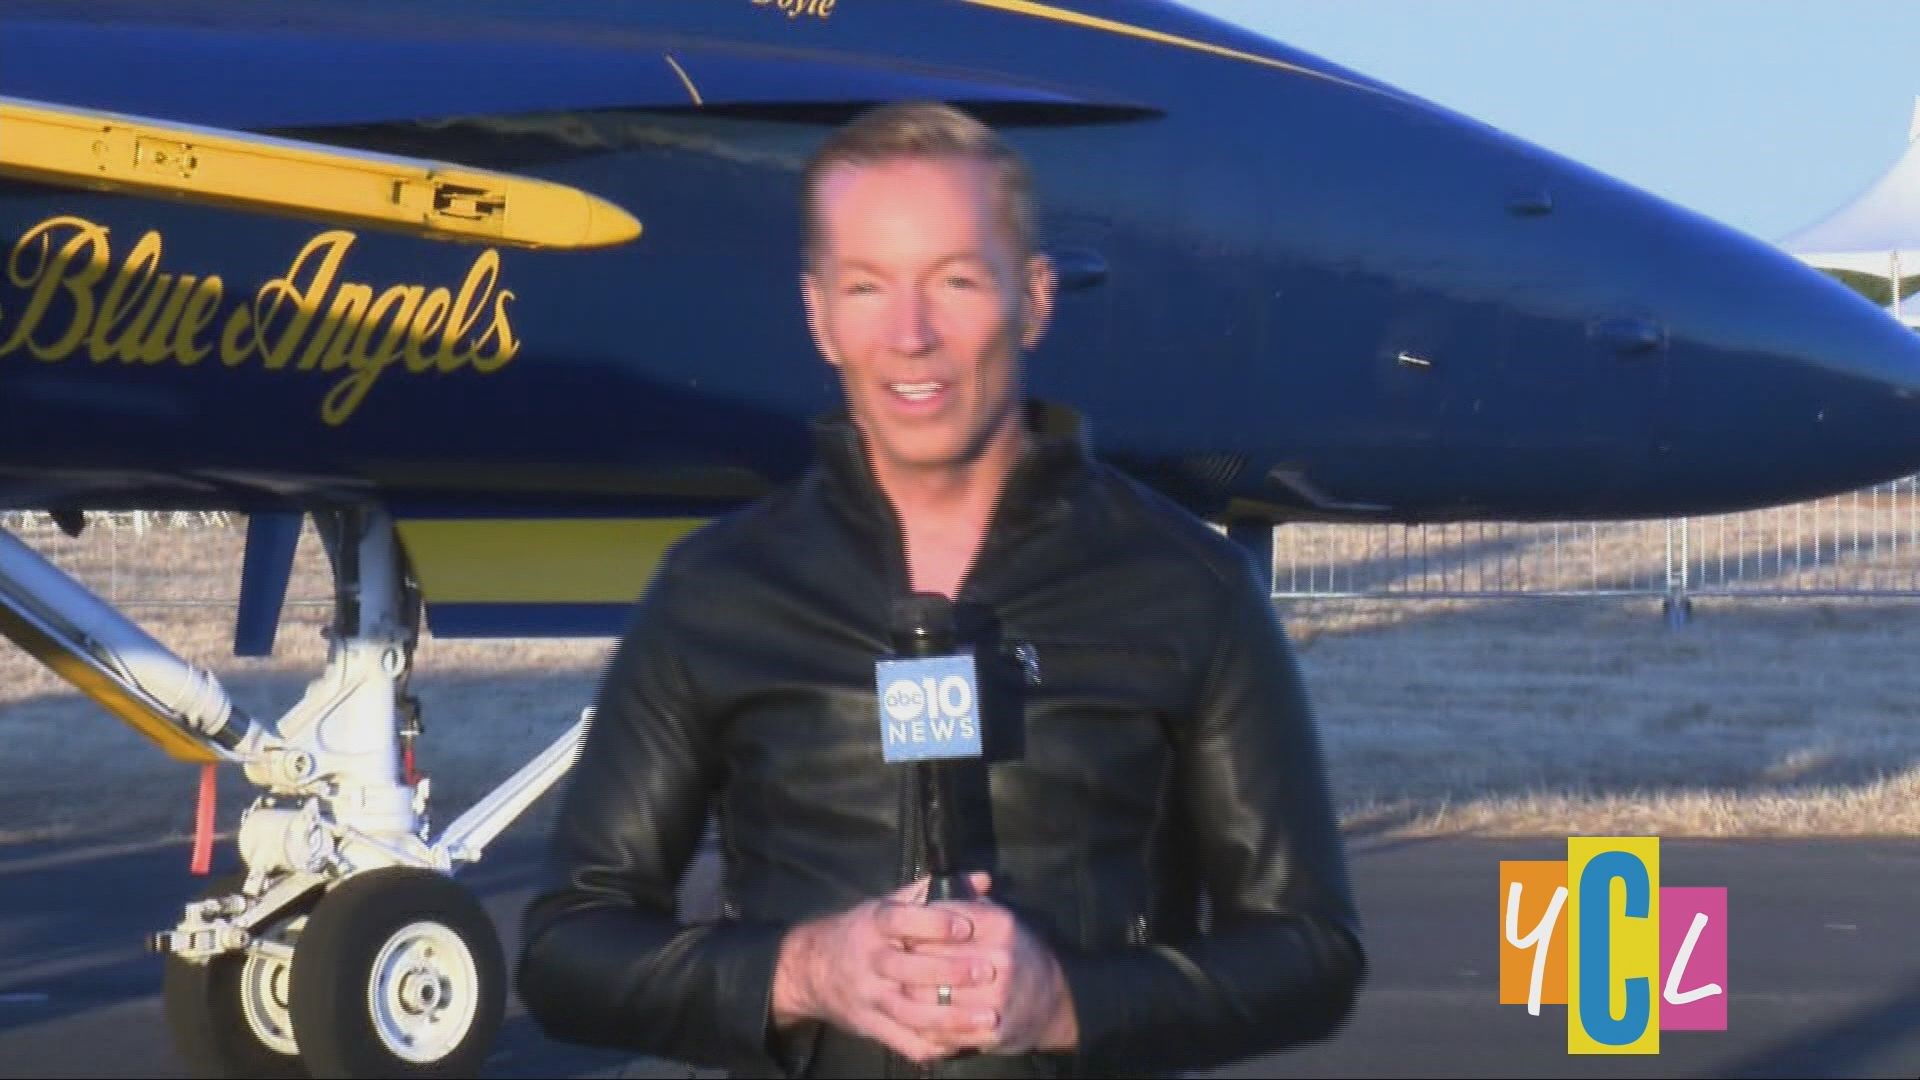 Find out where you can catch the Blue Angels!